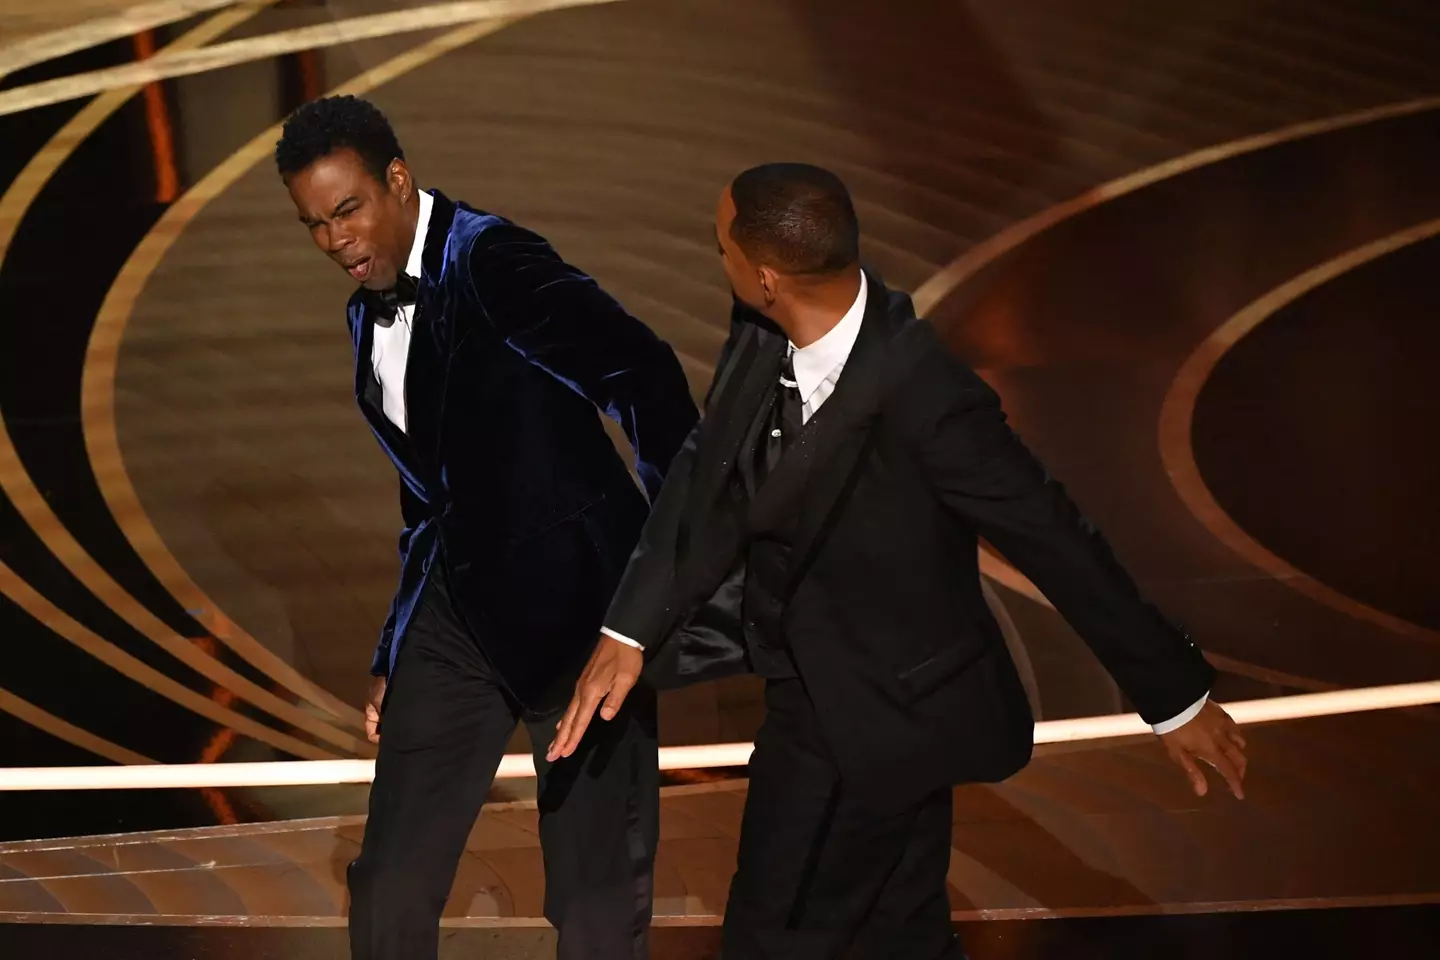 The world was in shock when Will Smith slapped Chris Rock over a comment made about Jada Pinkett Smith's shaved head.